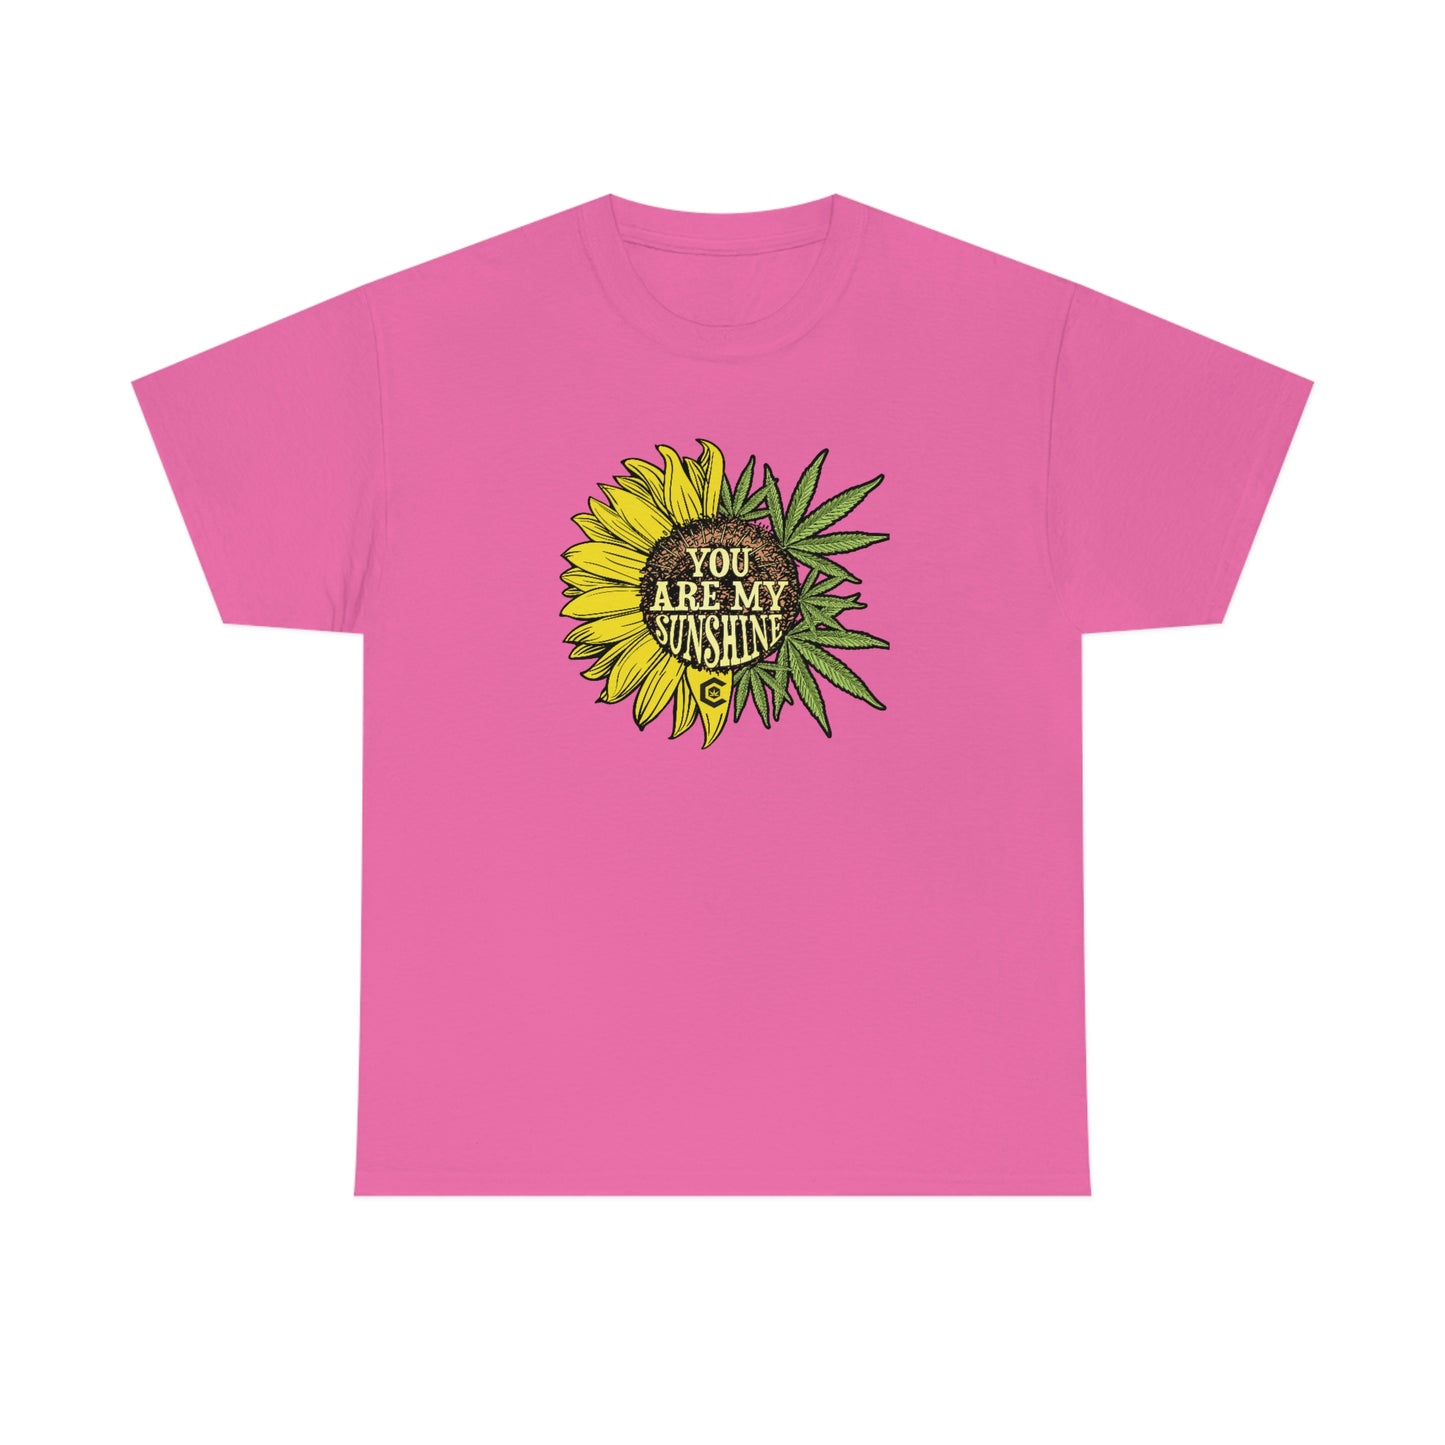 A "You Are My Sunshine Weed T-Shirt" with a sunflower on it.